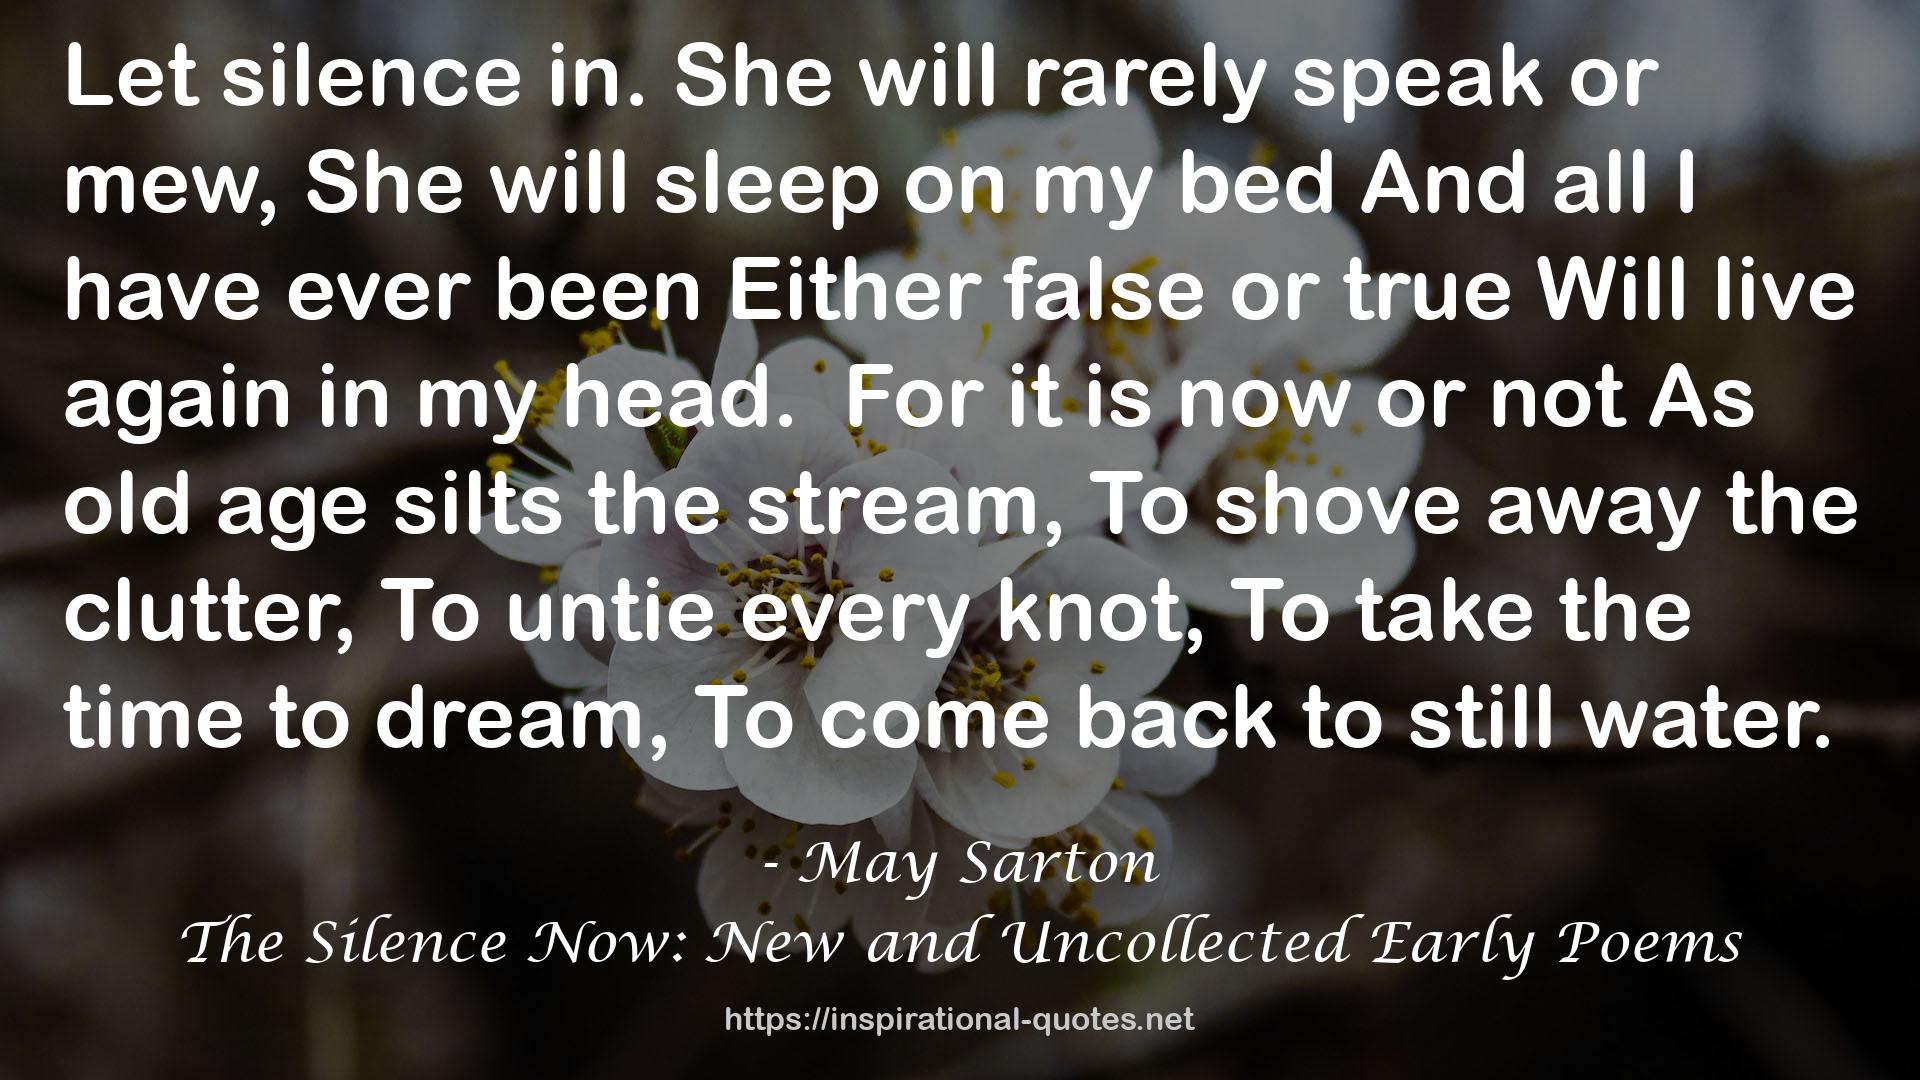 The Silence Now: New and Uncollected Early Poems QUOTES